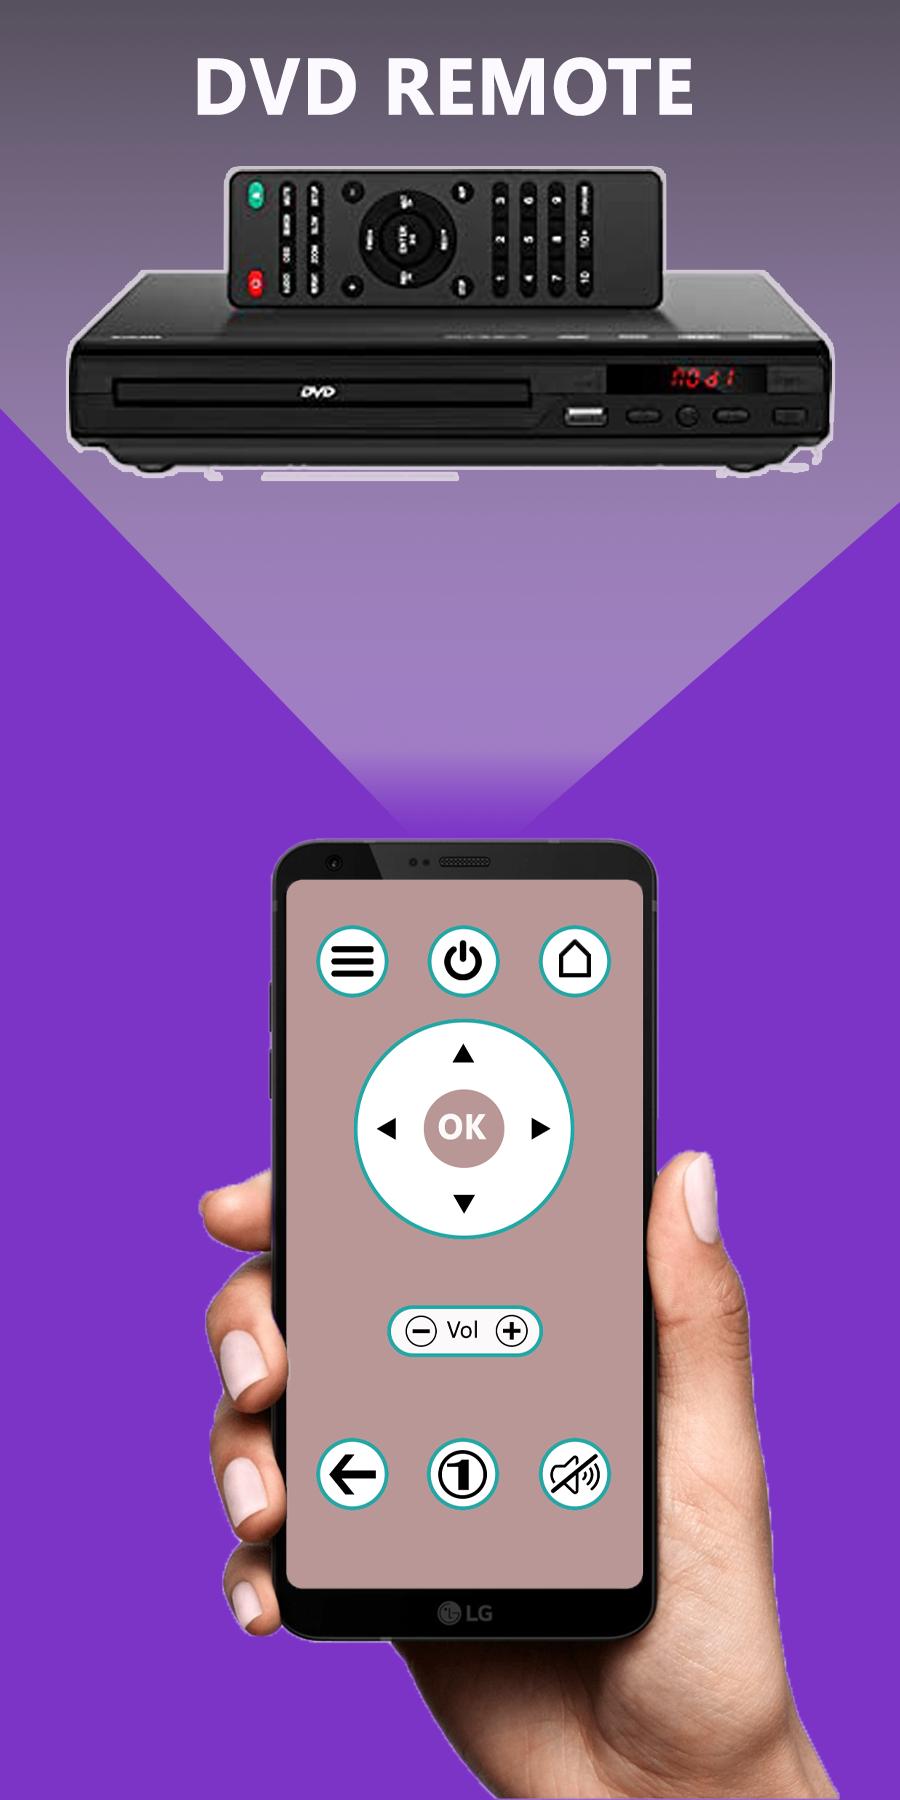 All DVD Player Remote - DVD Remote Control for Android - APK Download